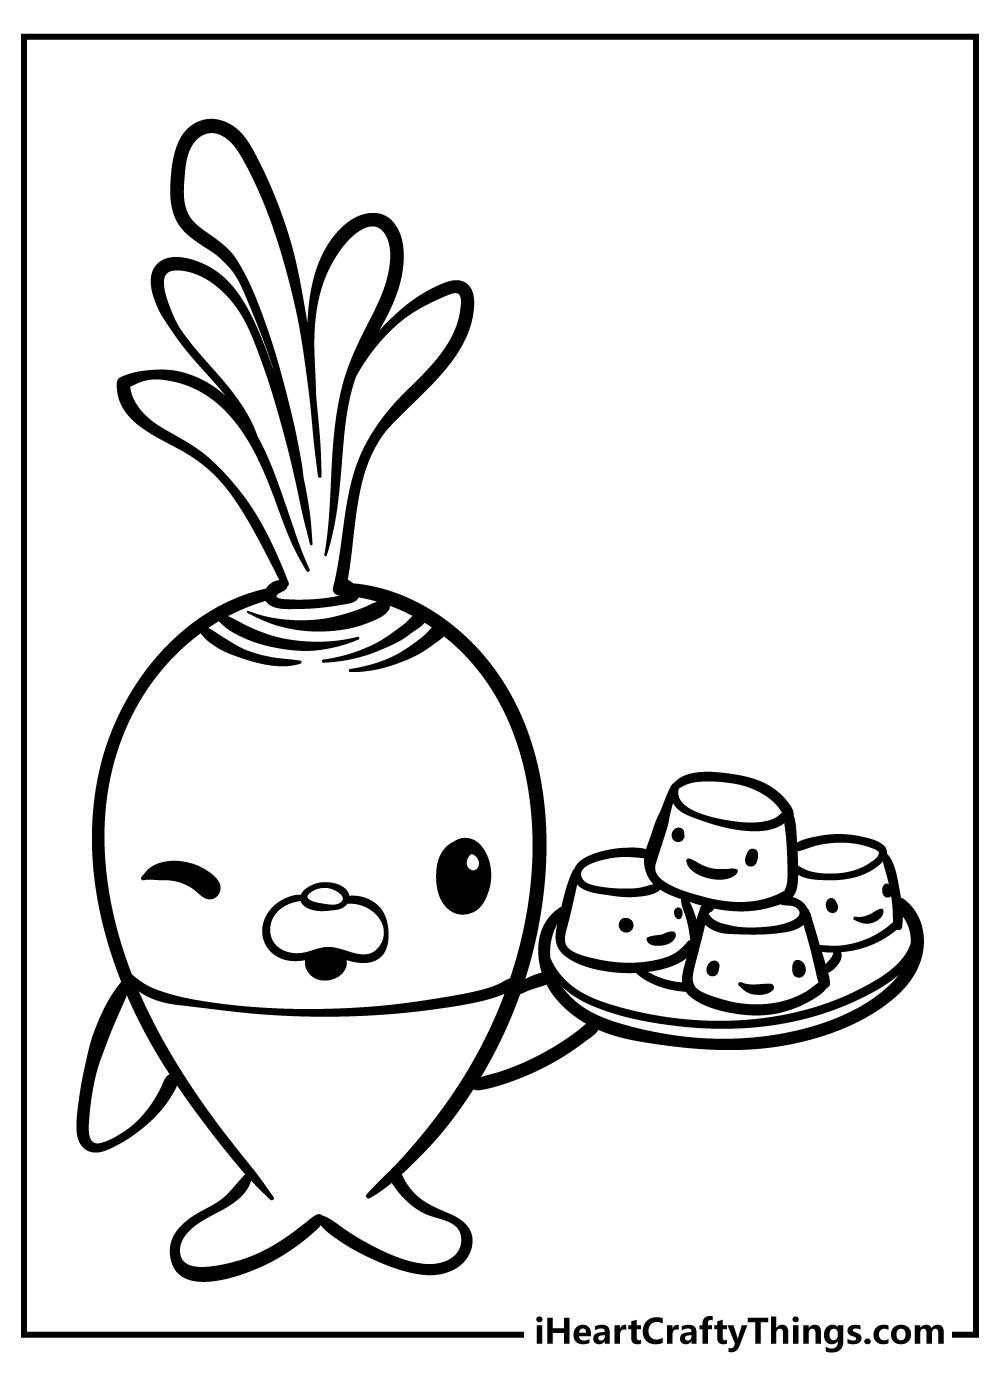 Printable Octonauts Coloring Pages Updated 20